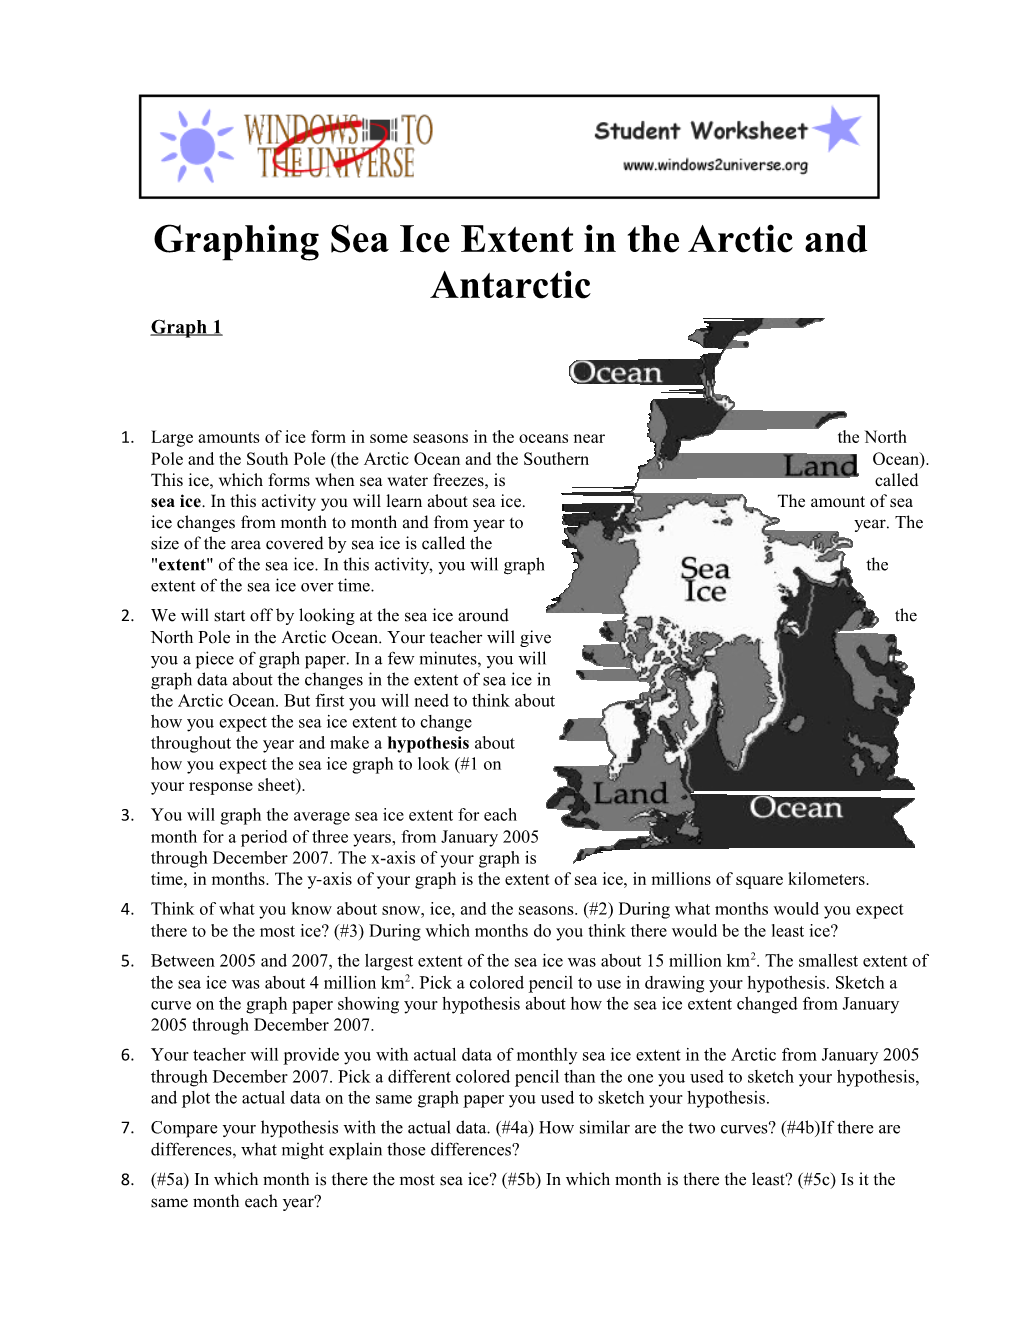 Graphing Sea Ice Extent in the Arctic and Antarctic